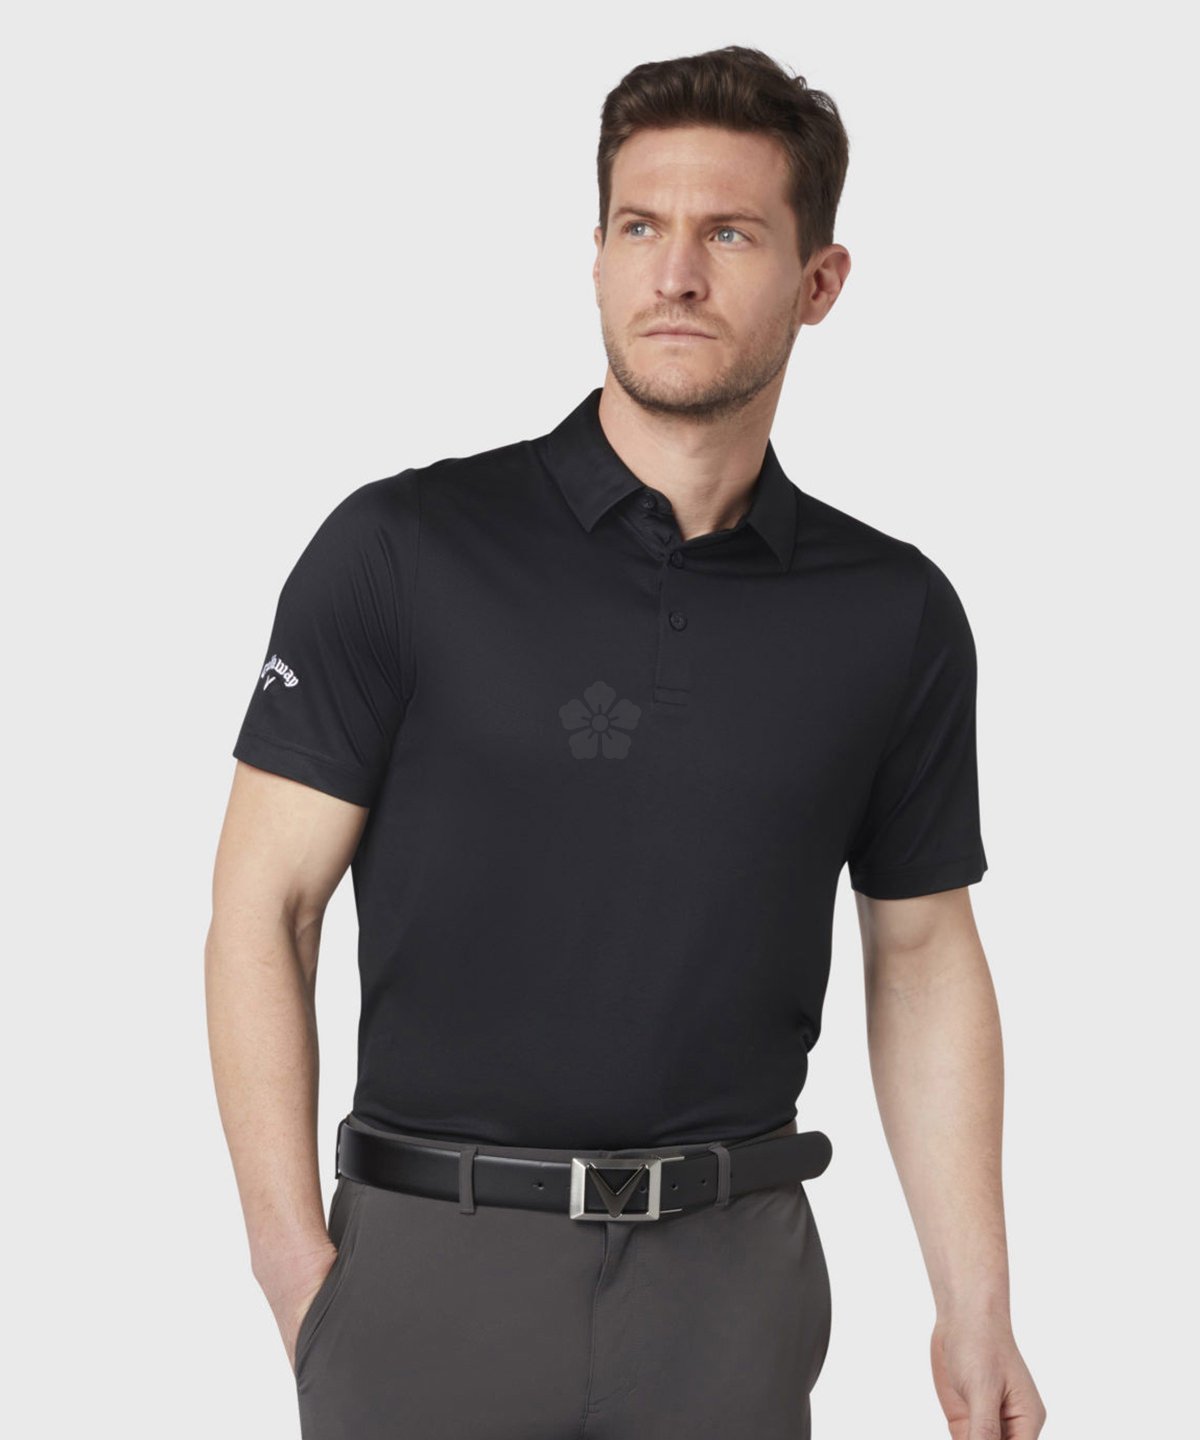 Promotional Callaway Swing Tech Polo, Personalised by MoJo Promotions